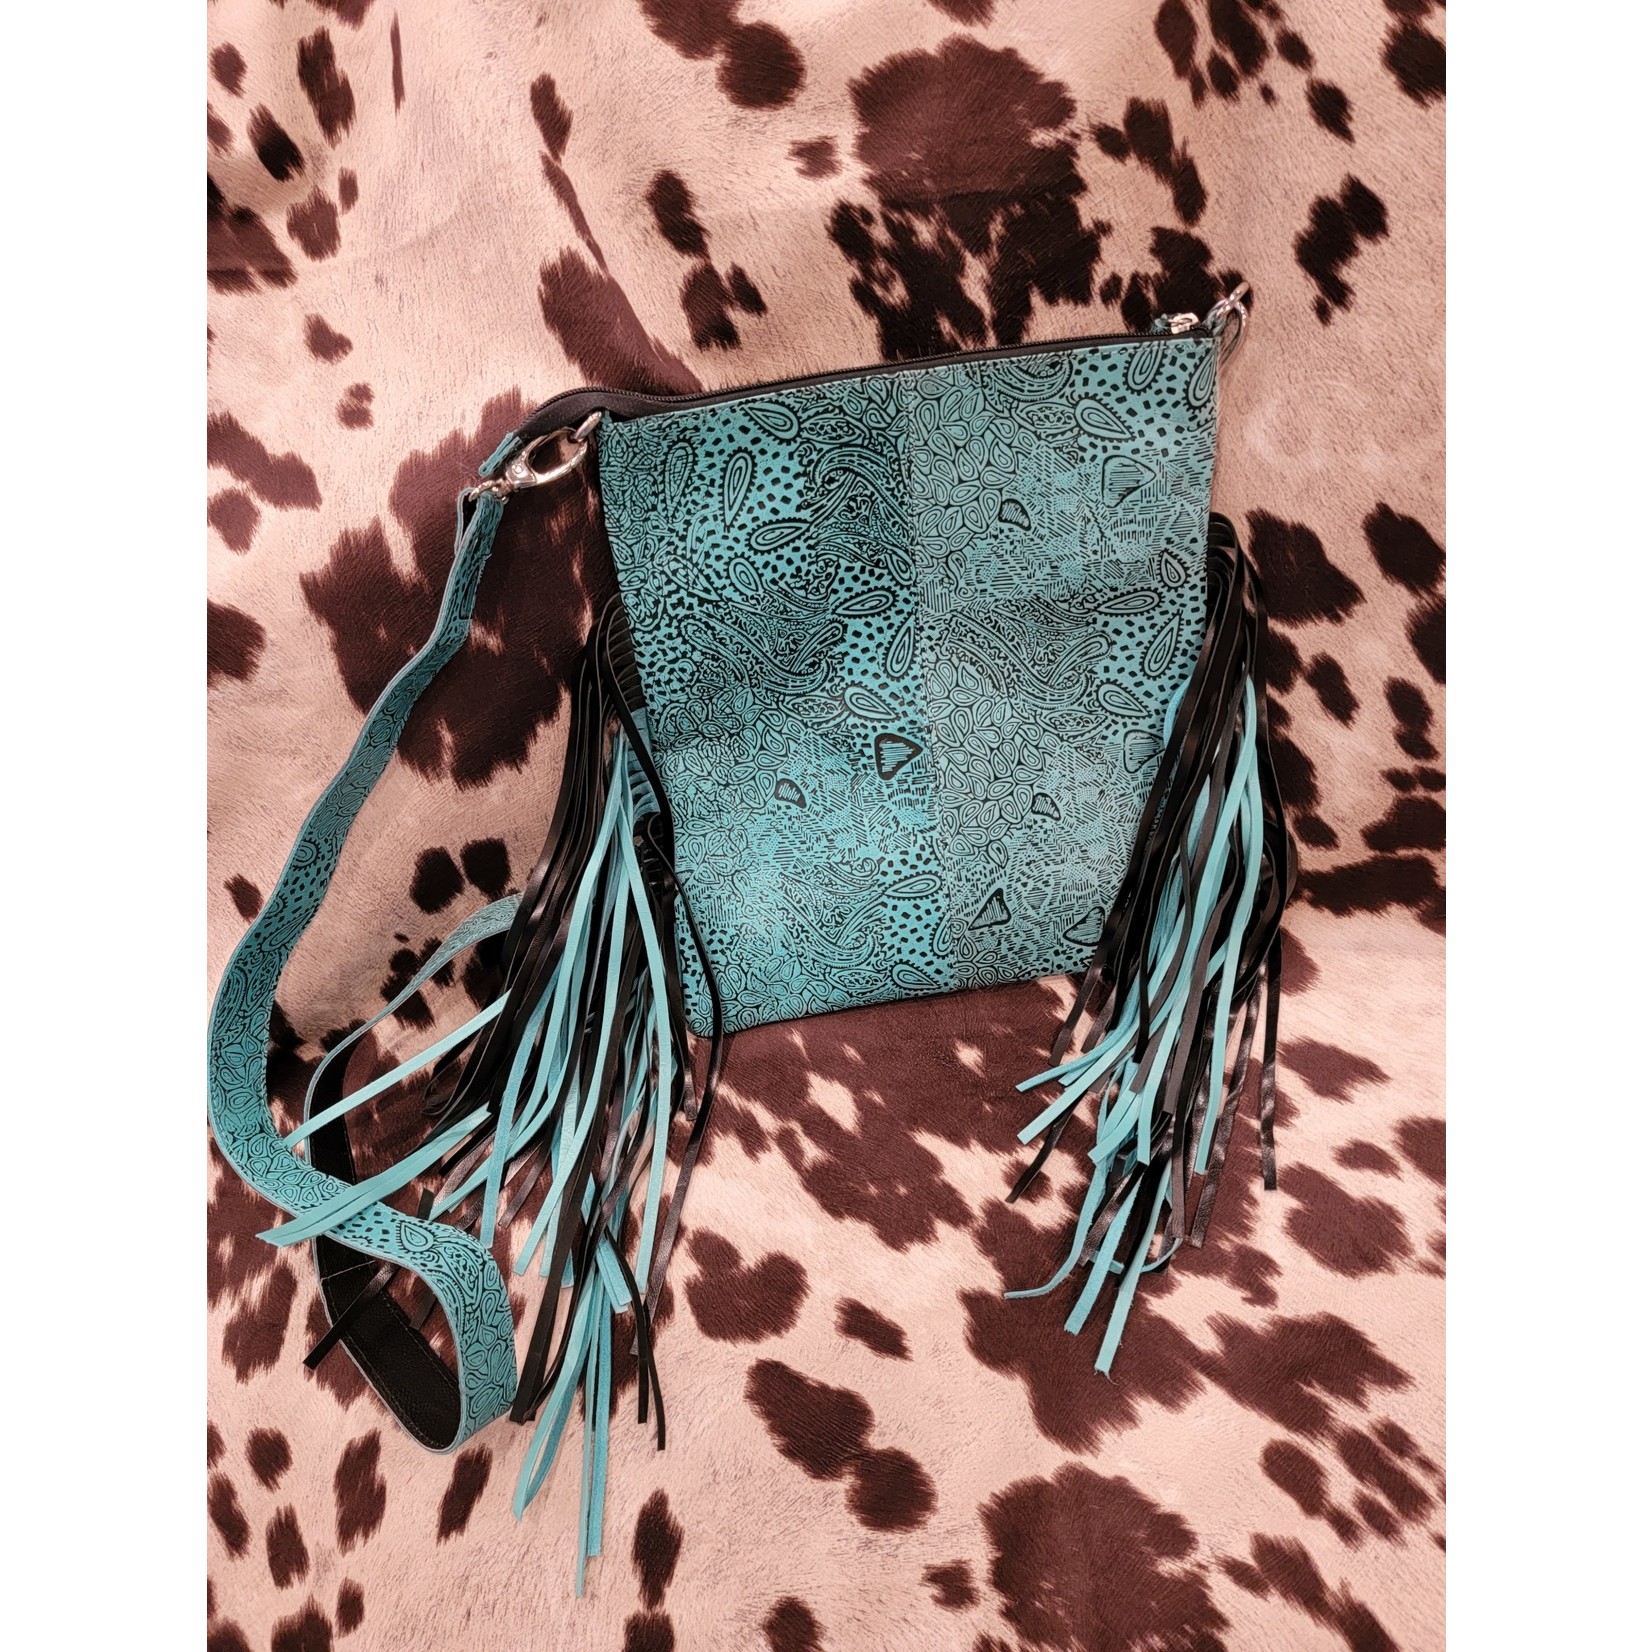 Turquoise Darling Purse